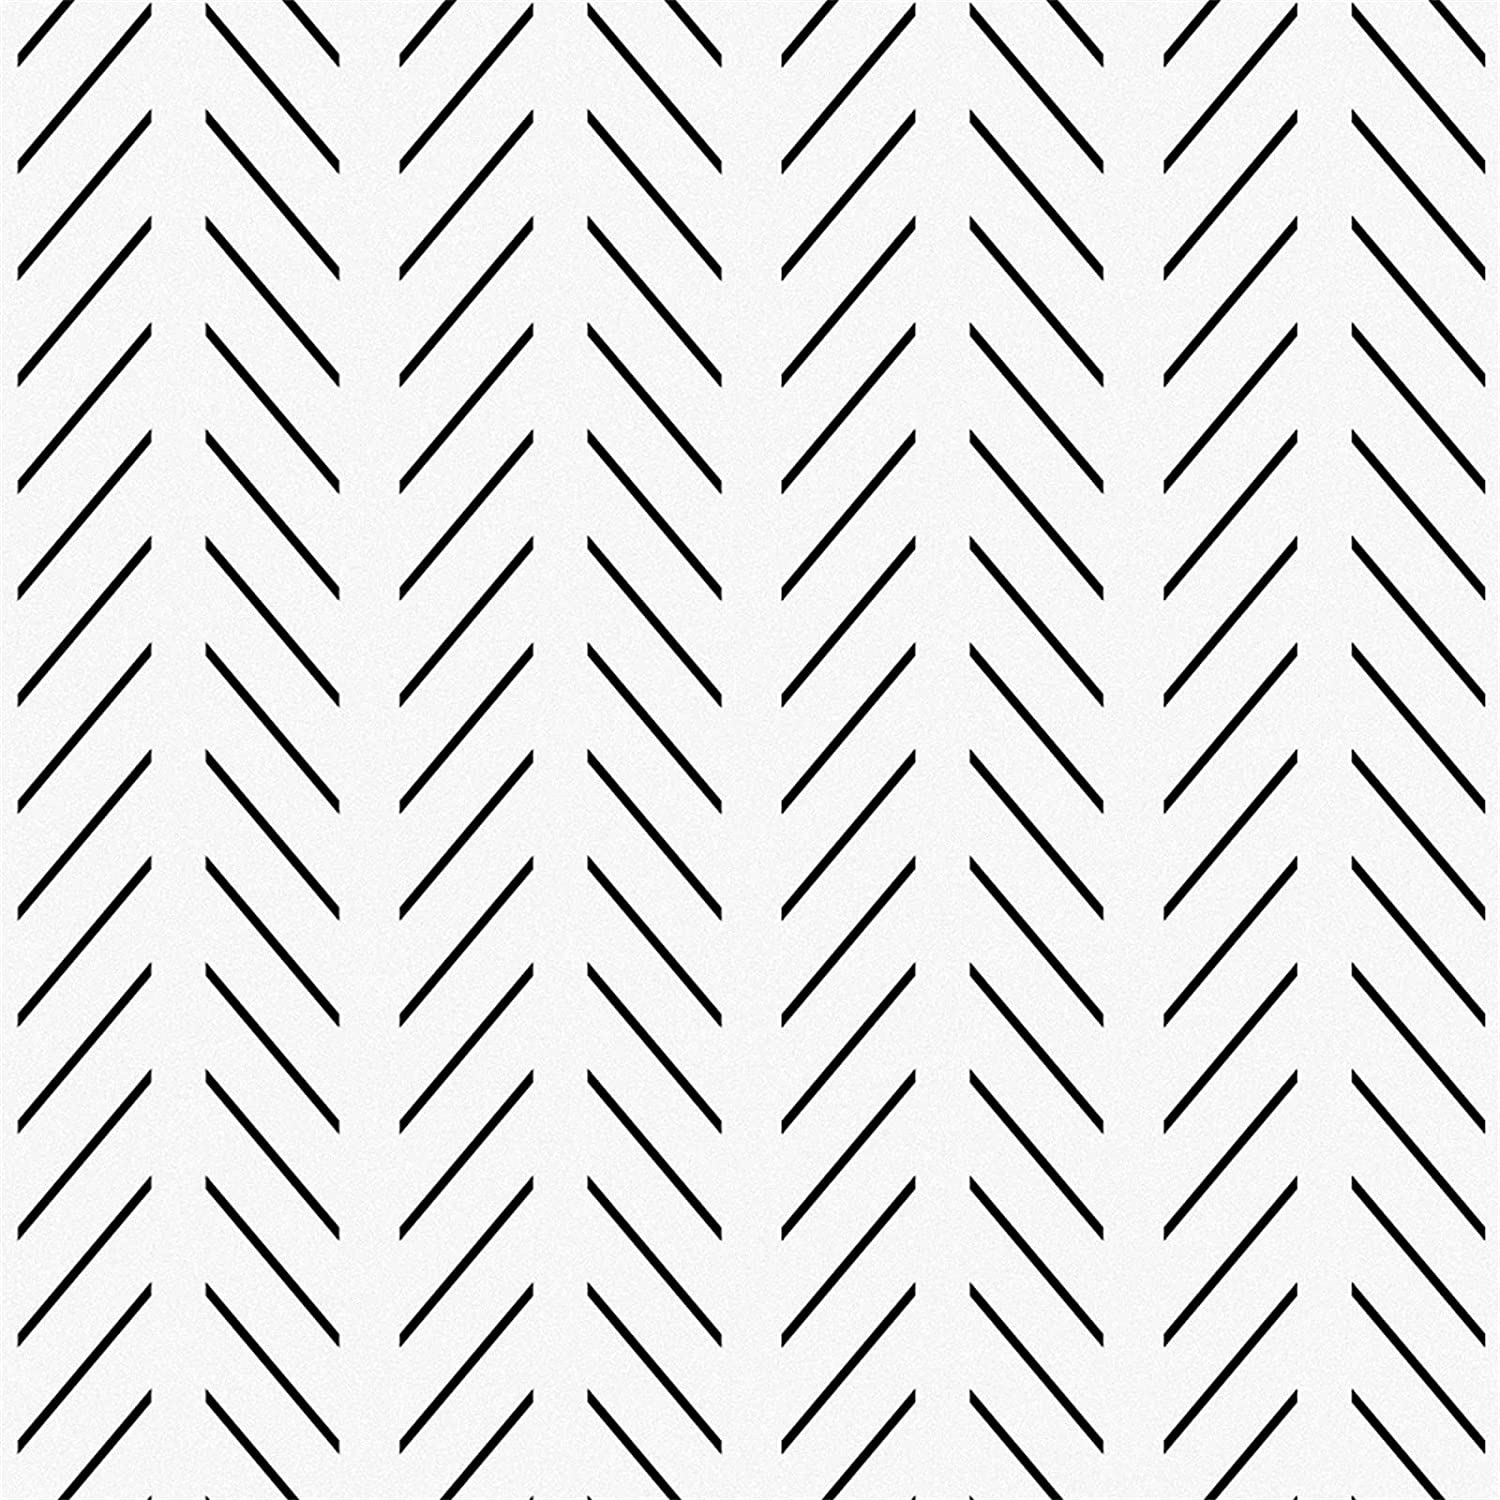 Black and White Contemporary Geometric Peel and Stick Fabric Removable Wallpaper 